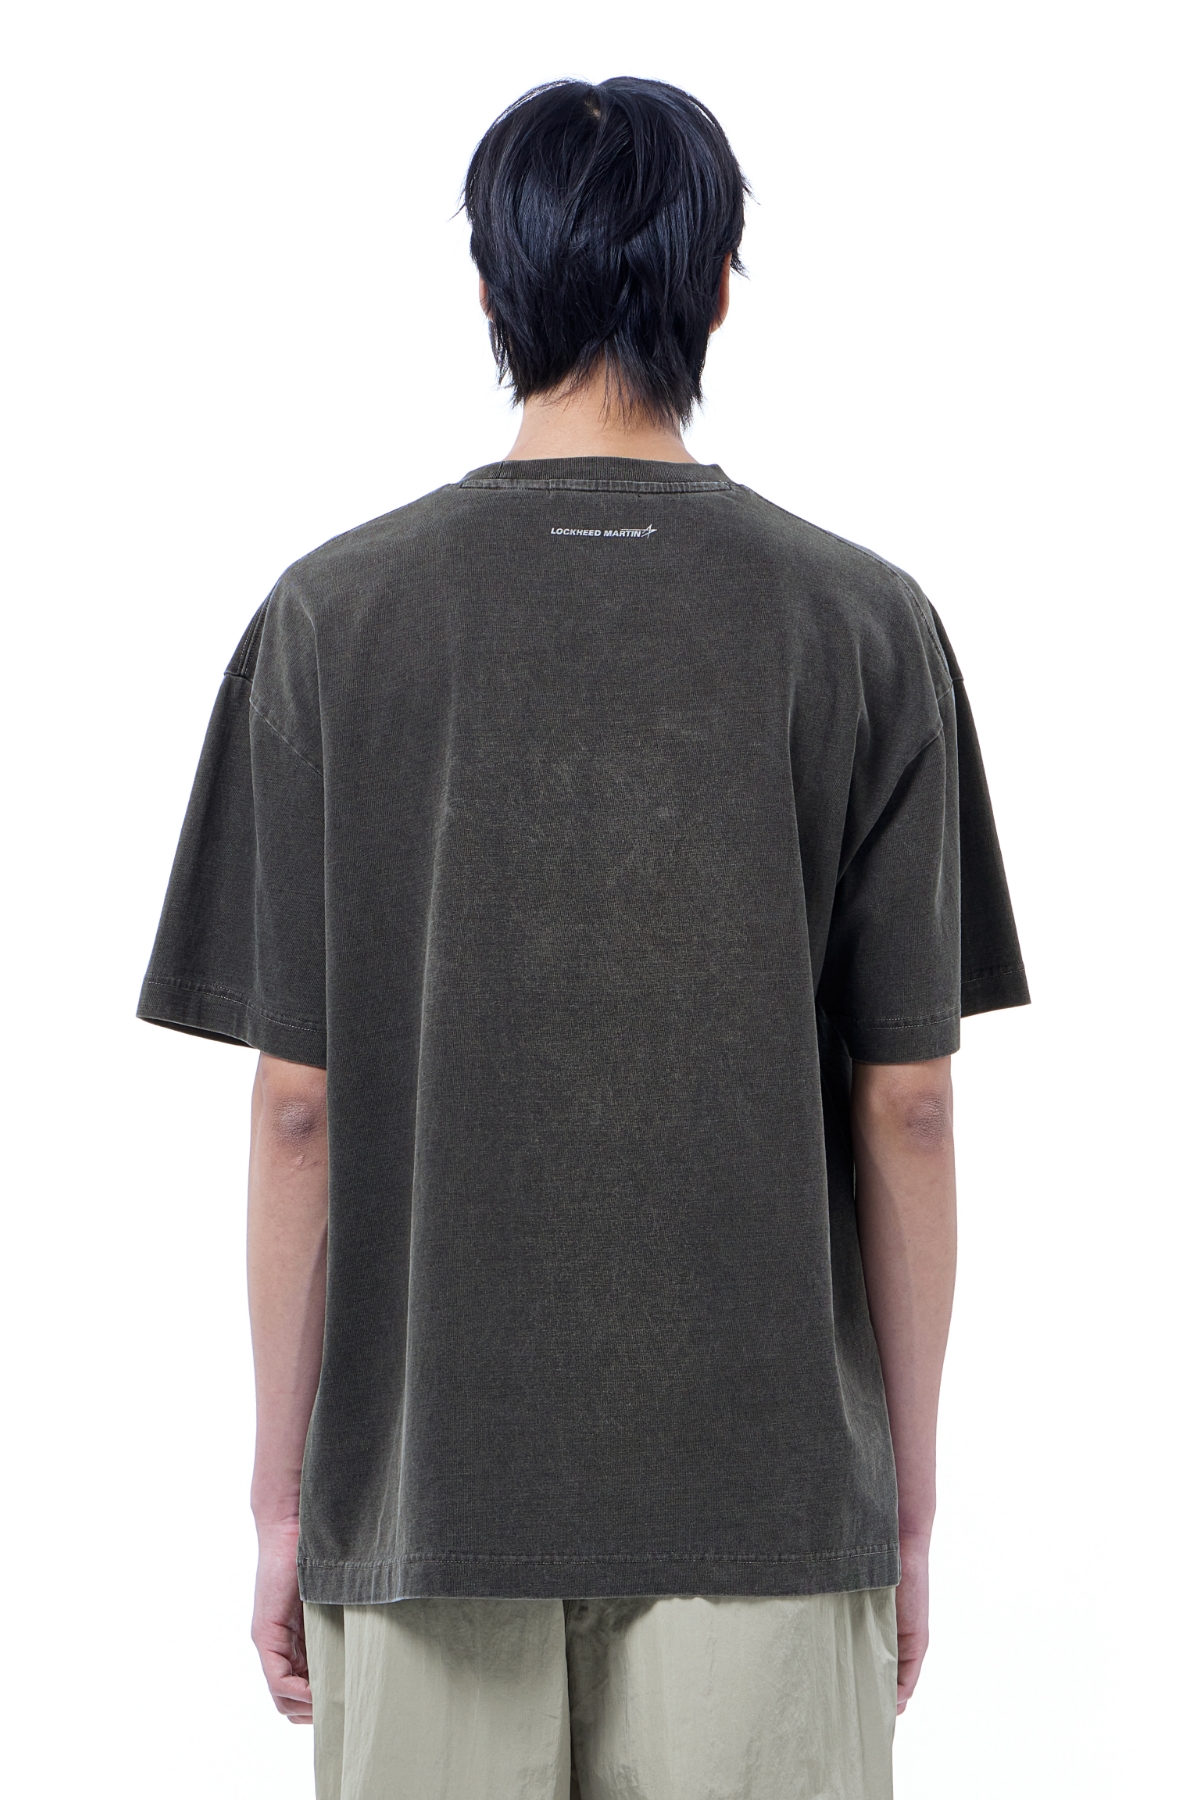 LM F-35 GRAPHIC GARMENT DYED OVER T-SHIRT (CHARCOAL)